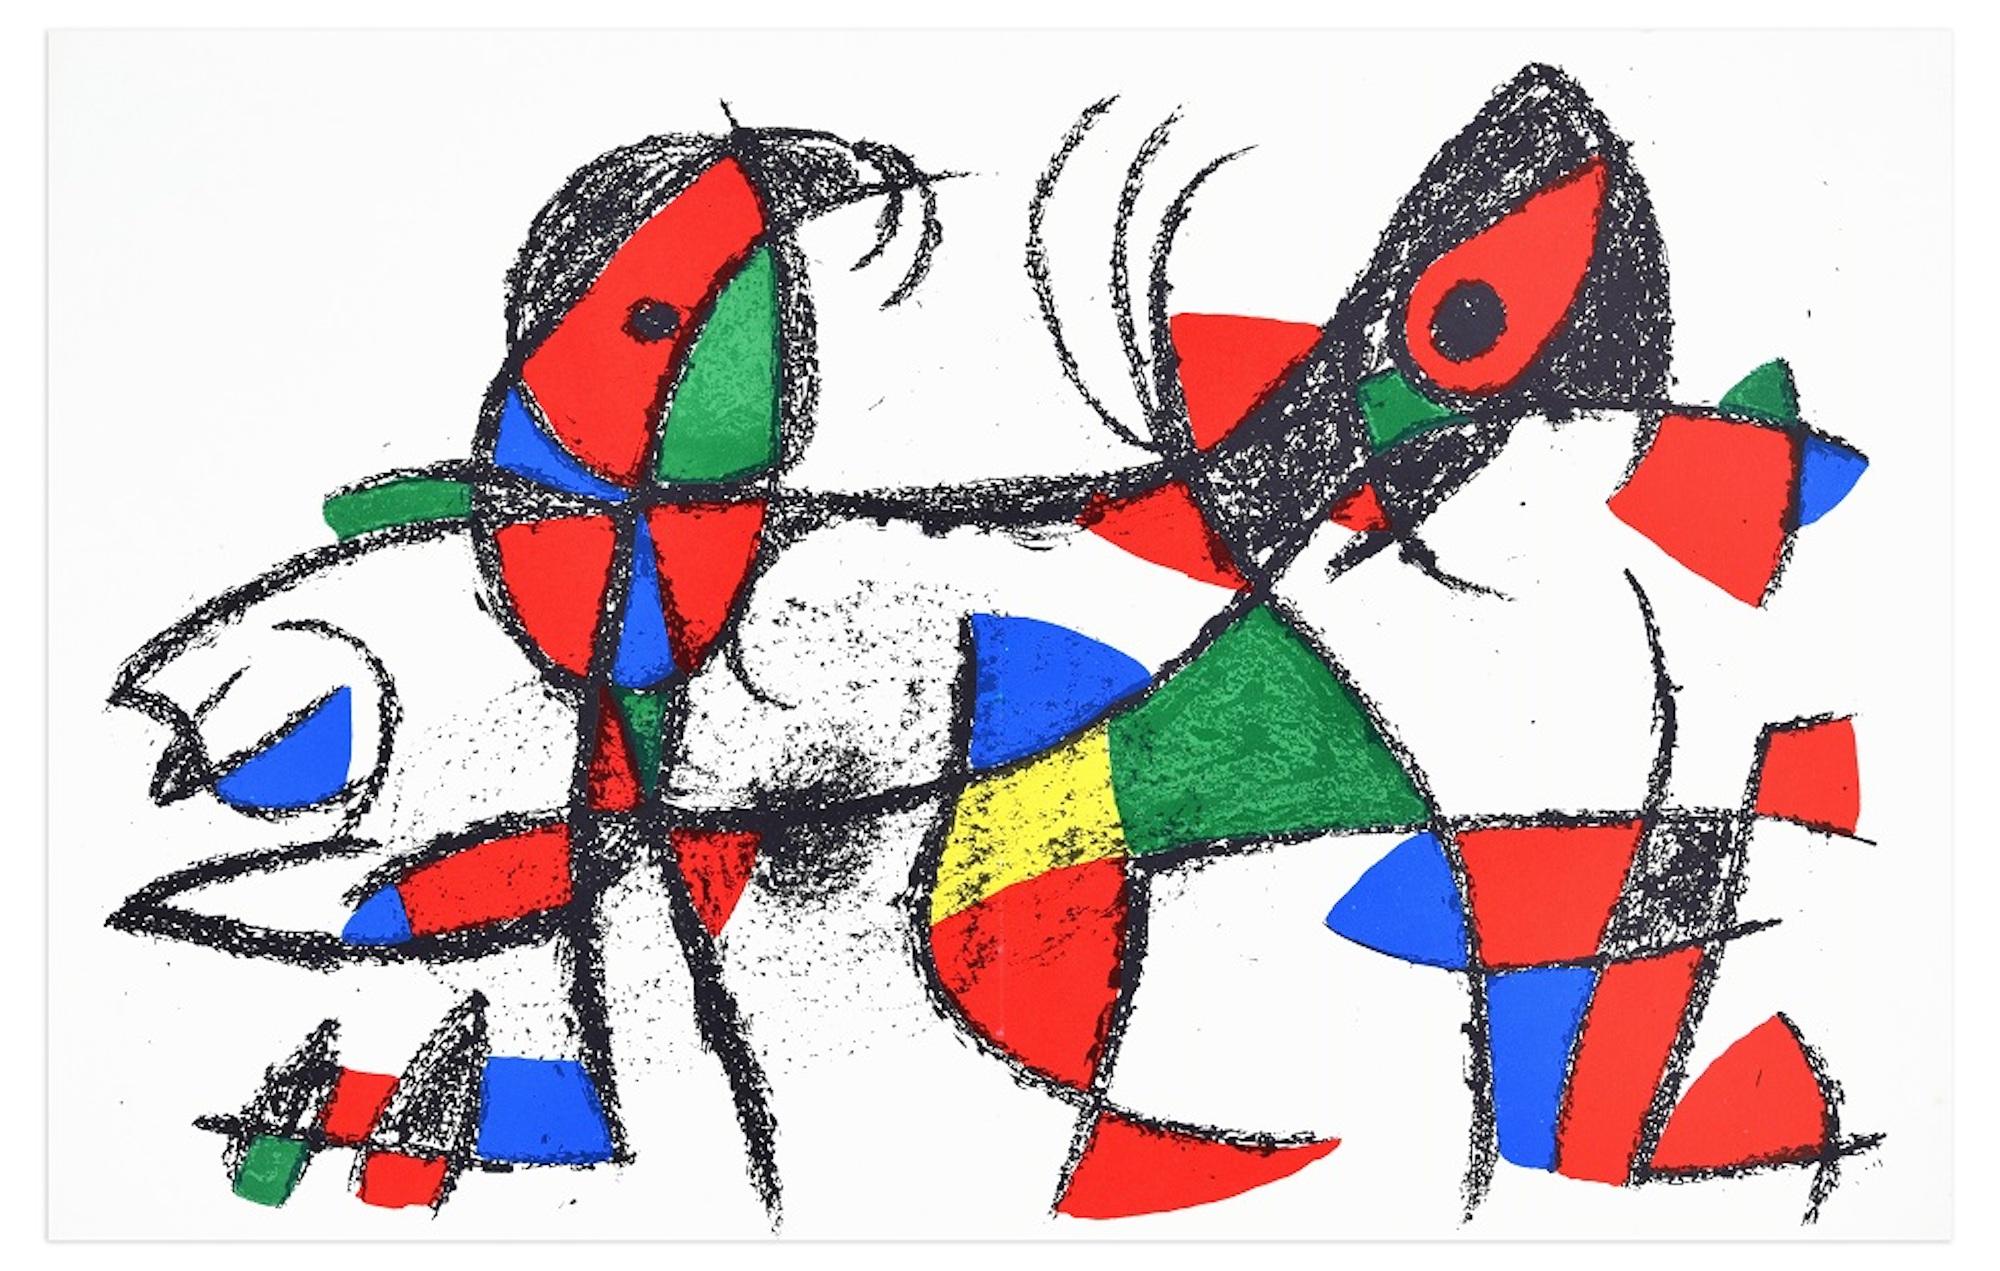 (after) Joan Miró Abstract Print - Composition X - Lithograph by Joan Mirò - 1974